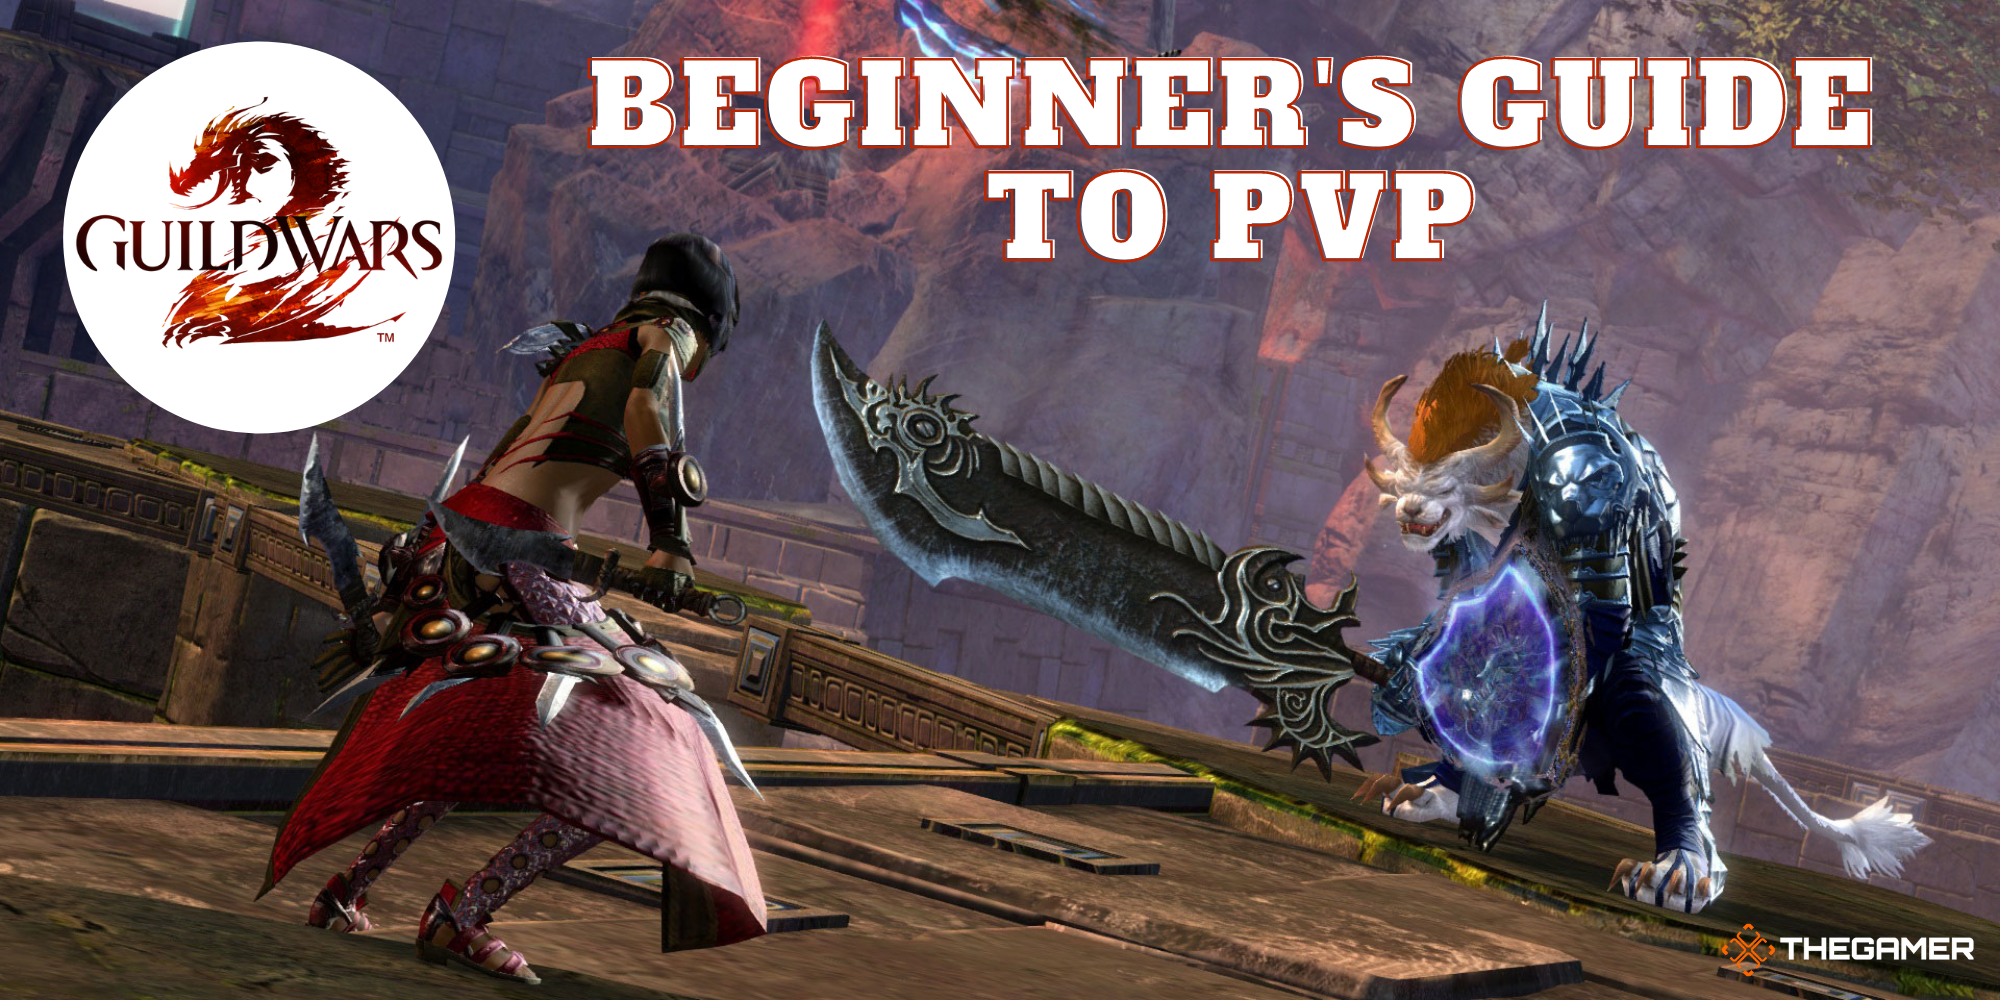 GW2 - Title Card reading Beginner's Guide To PvP, background features two players fighting